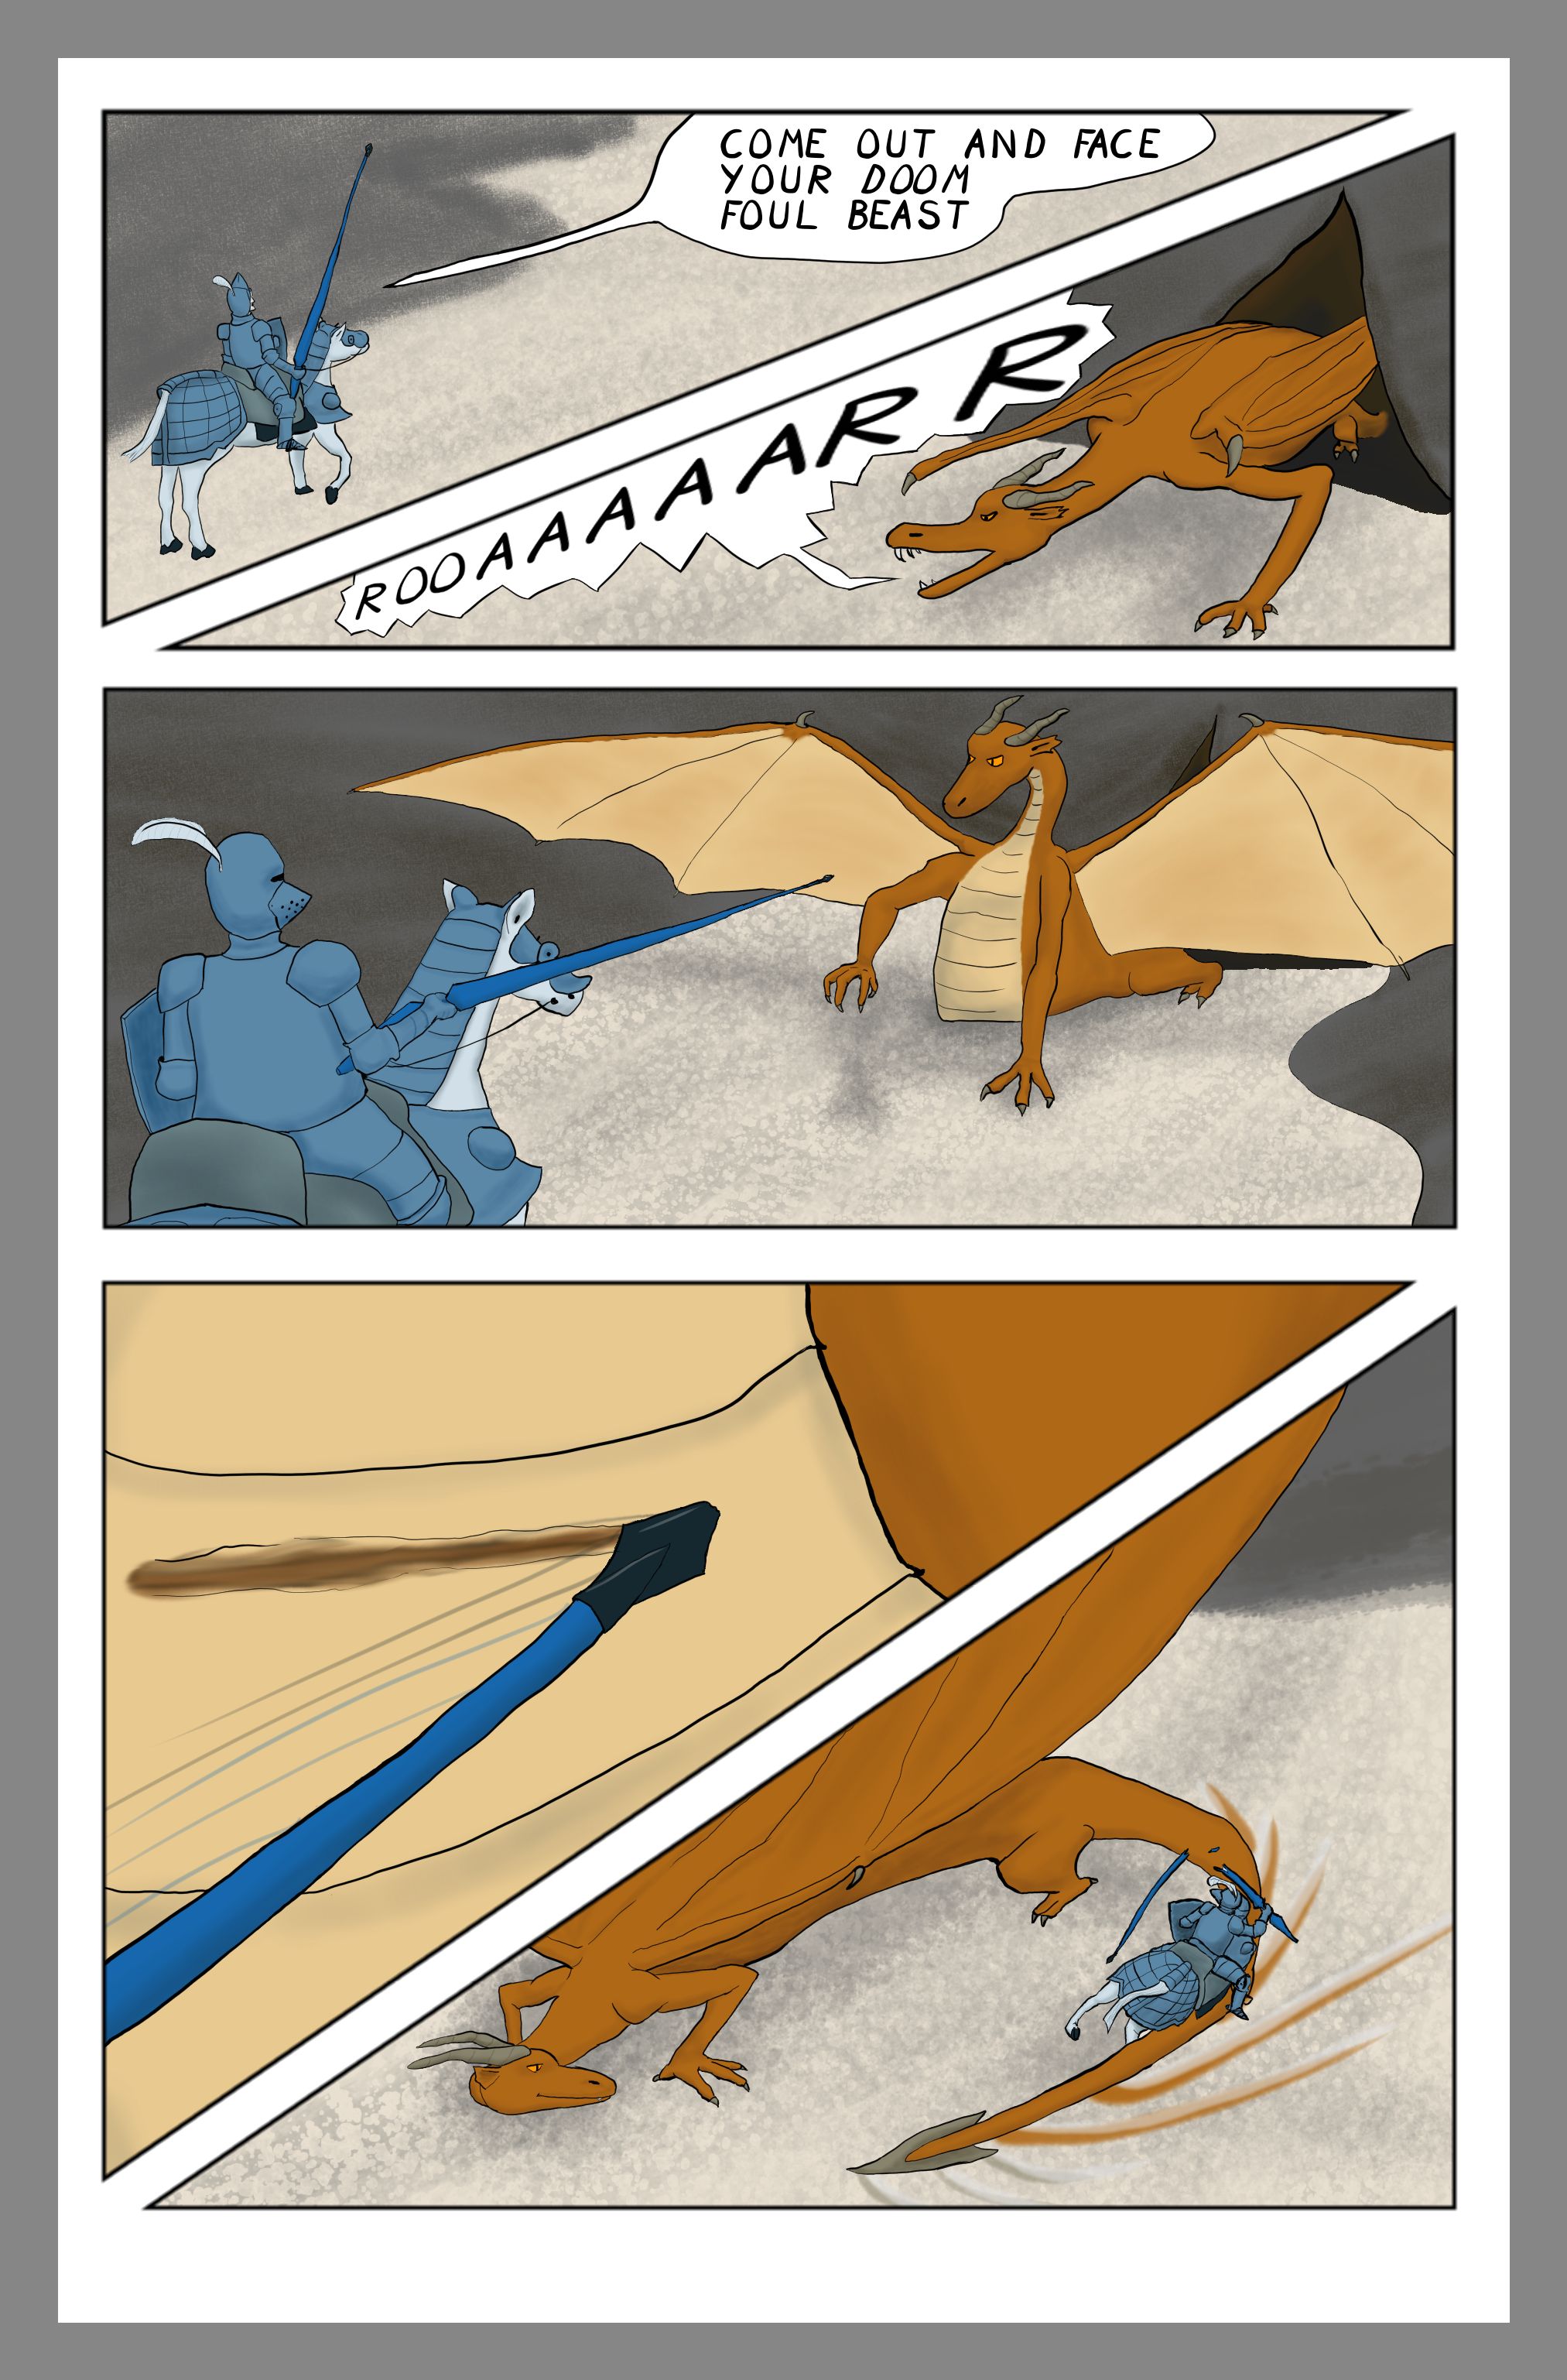 A comic featuring a knight challenging a dragon, who roars in response, a knight charging the dragon and scraping his lance on the scales. the dragon responds by sweaping the knight off of his horse with it's tail.